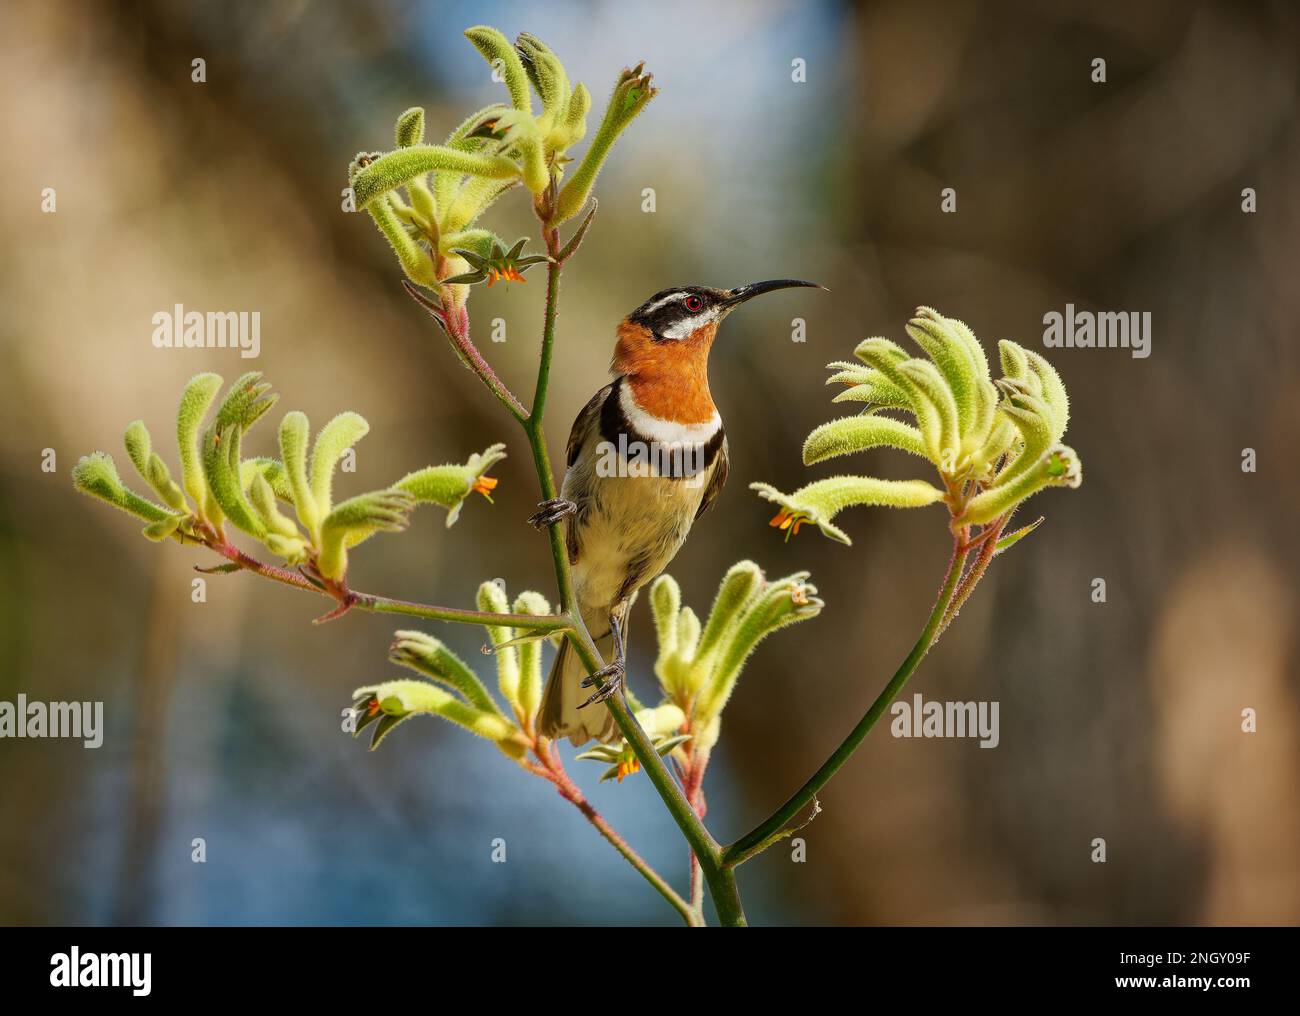 Western Spinebill - Acanthorhynchus superciliosus honeyeater found in south-western Australia, black head, gray back and wings, curved long bill, bird Stock Photo